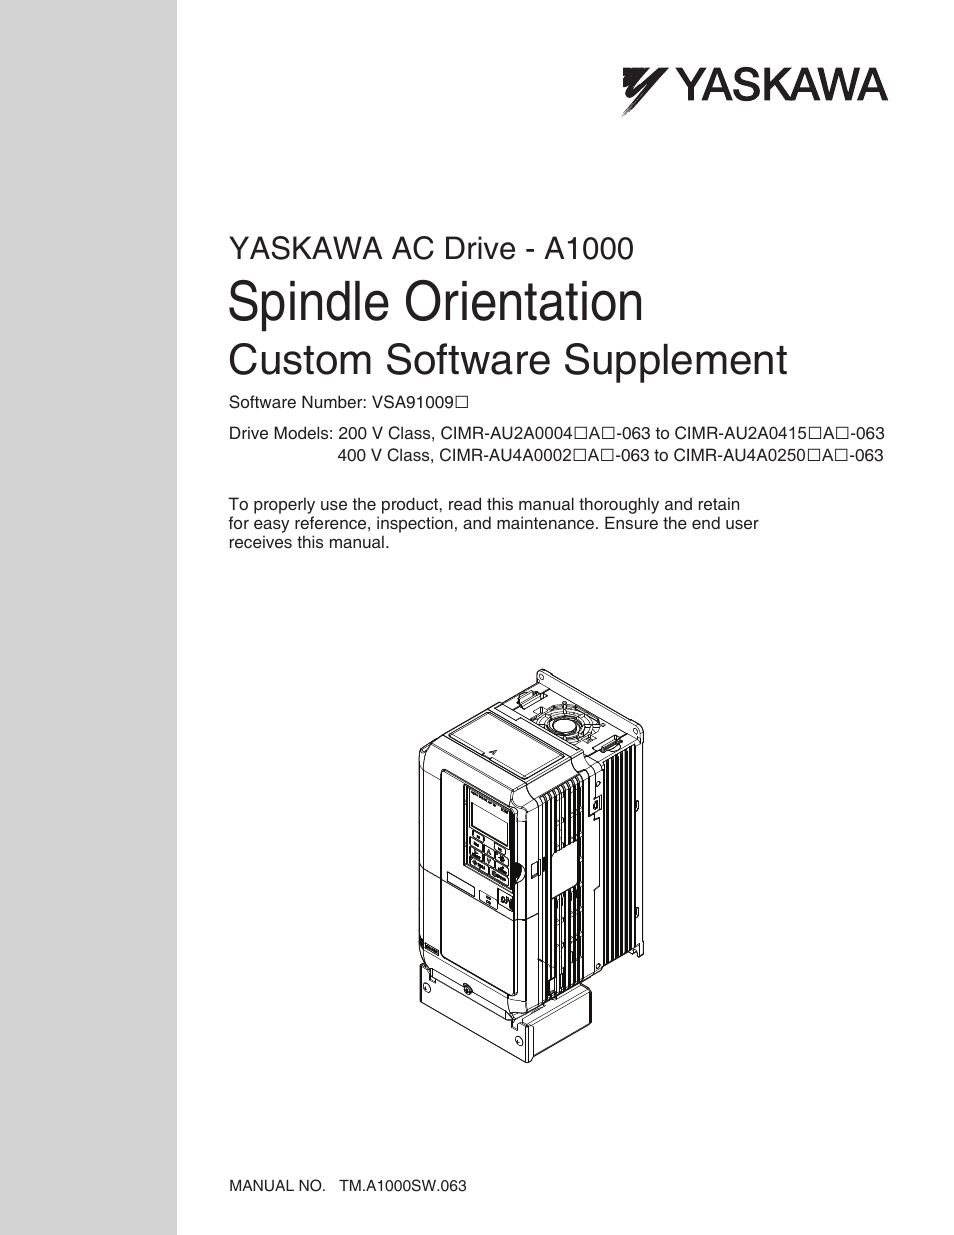 A1000 AC Drive Spindle Orientation